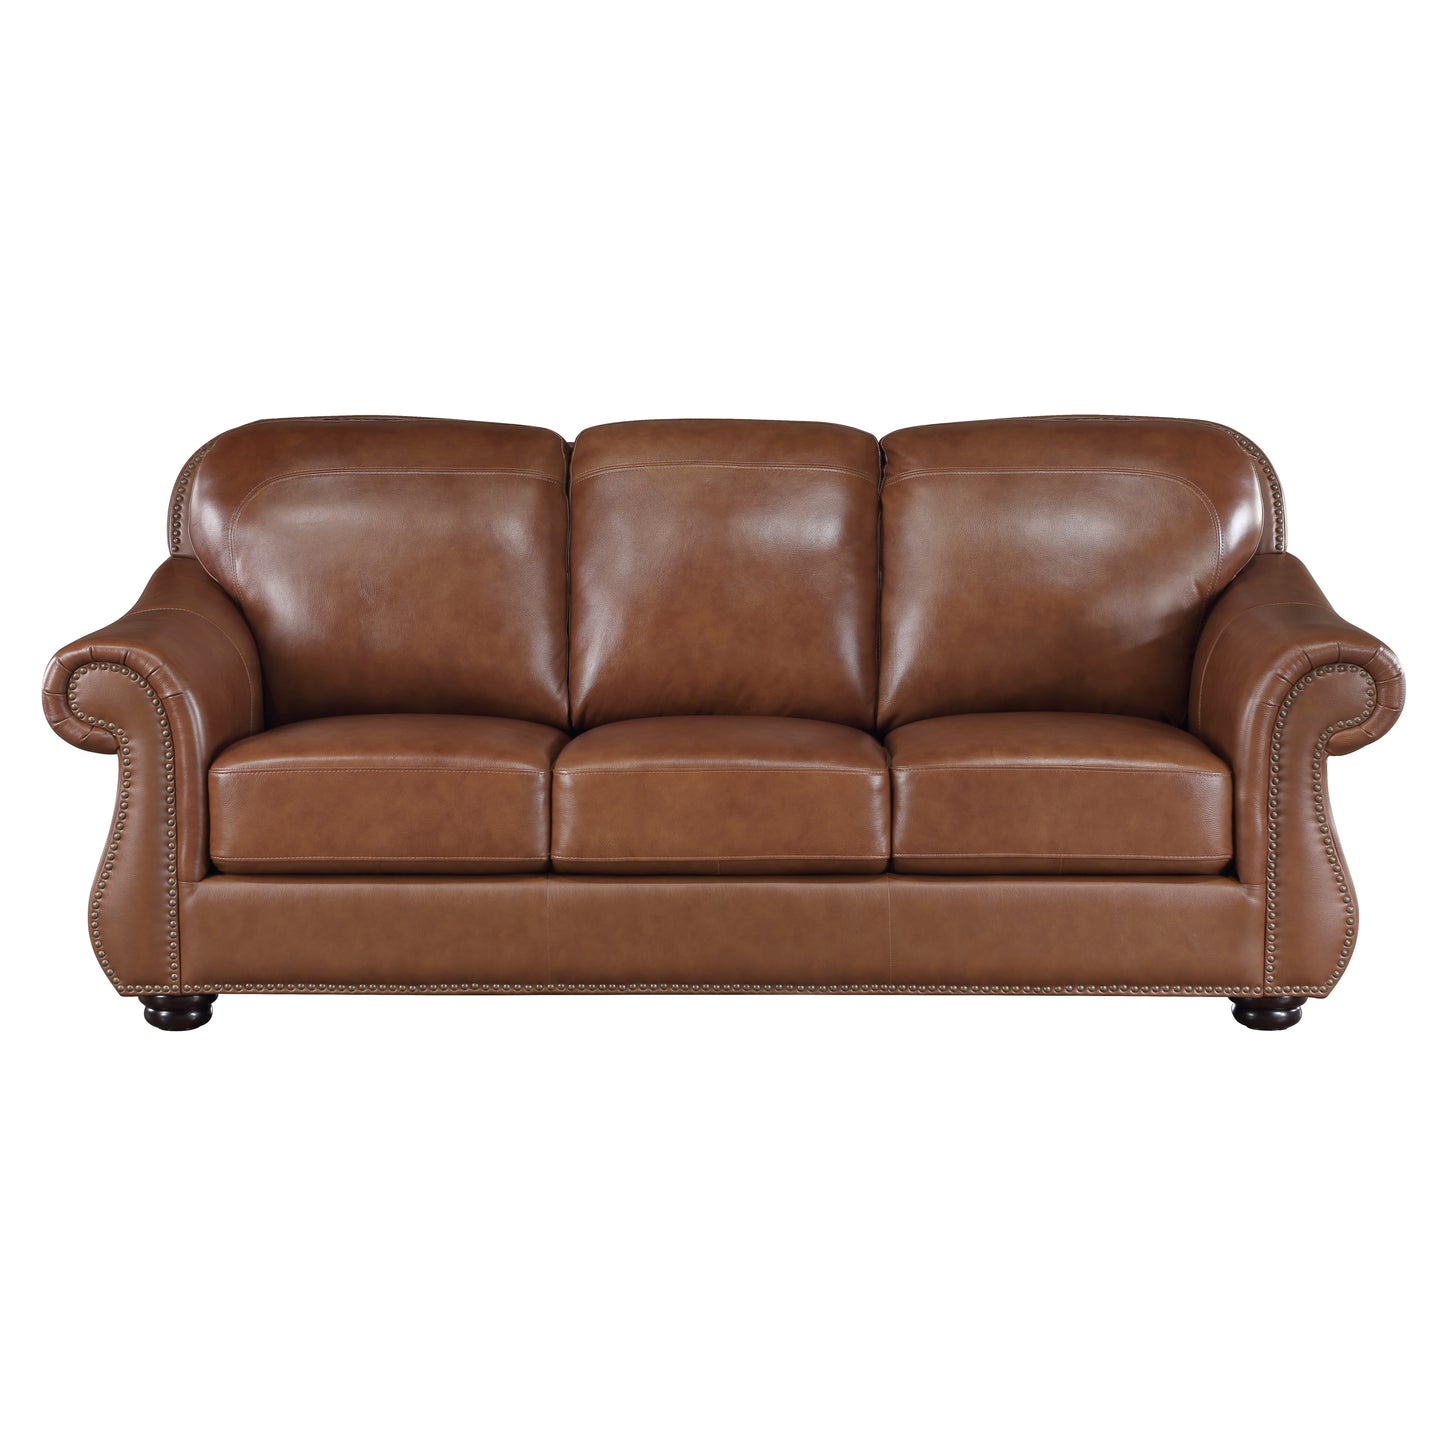 Attleboro Top Grain Leather Sofa ONE COLOR ONLY